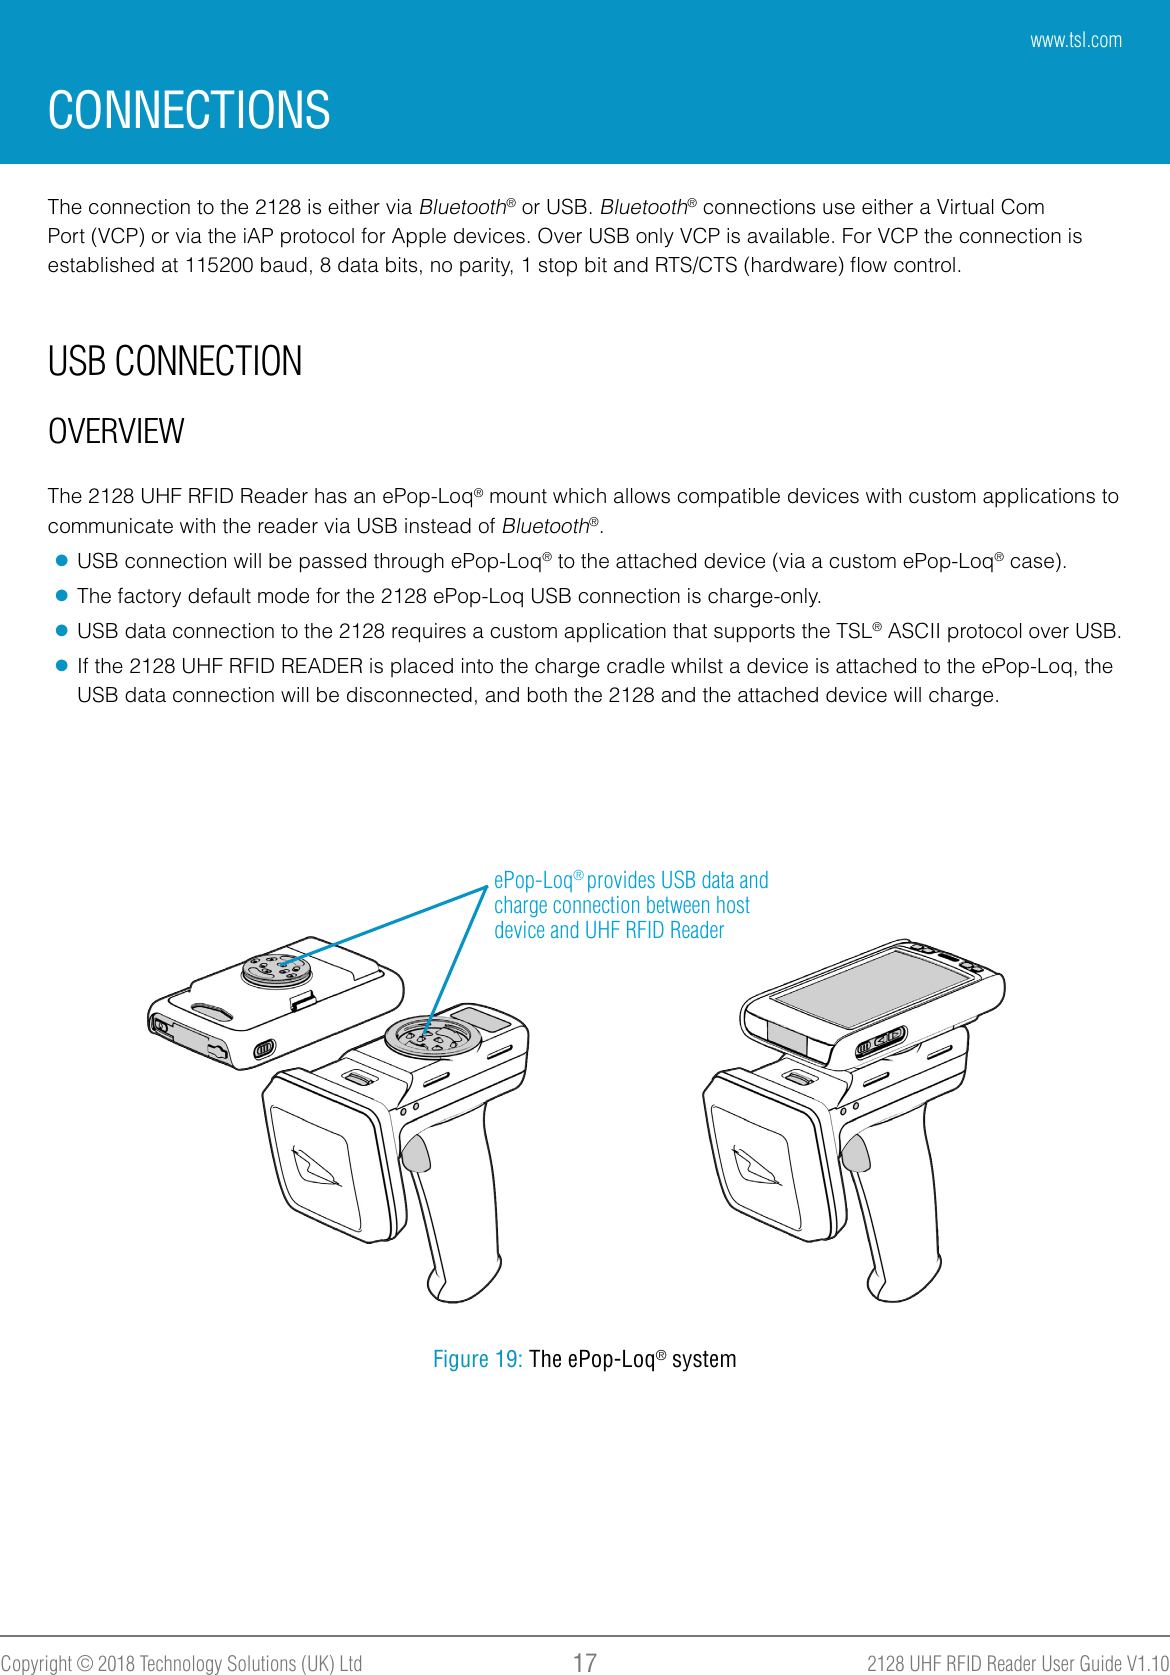 2128 UHF RFID Reader User Guide V1.10Copyright © 2018 Technology Solutions (UK) Ltd 17USB CONNECTIONOVERVIEWCONNECTIONSThe connection to the 2128 is either via Bluetooth® or USB. Bluetooth® connections use either a Virtual Com Port (VCP) or via the iAP protocol for Apple devices. Over USB only VCP is available. For VCP the connection is established at 115200 baud, 8 data bits, no parity, 1 stop bit and RTS/CTS (hardware) ﬂow control.The 2128 UHF RFID Reader has an ePop-Loq® mount which allows compatible devices with custom applications to communicate with the reader via USB instead of Bluetooth®. ●USB connection will be passed through ePop-Loq® to the attached device (via a custom ePop-Loq® case). ●The factory default mode for the 2128 ePop-Loq USB connection is charge-only.  ●USB data connection to the 2128 requires a custom application that supports the TSL® ASCII protocol over USB. ●If the 2128 UHF RFID READER is placed into the charge cradle whilst a device is attached to the ePop-Loq, the USB data connection will be disconnected, and both the 2128 and the attached device will charge.ePop-Loq® provides USB data and charge connection between host device and UHF RFID ReaderFigure 19: The ePop-Loq® systemwww.tsl.com